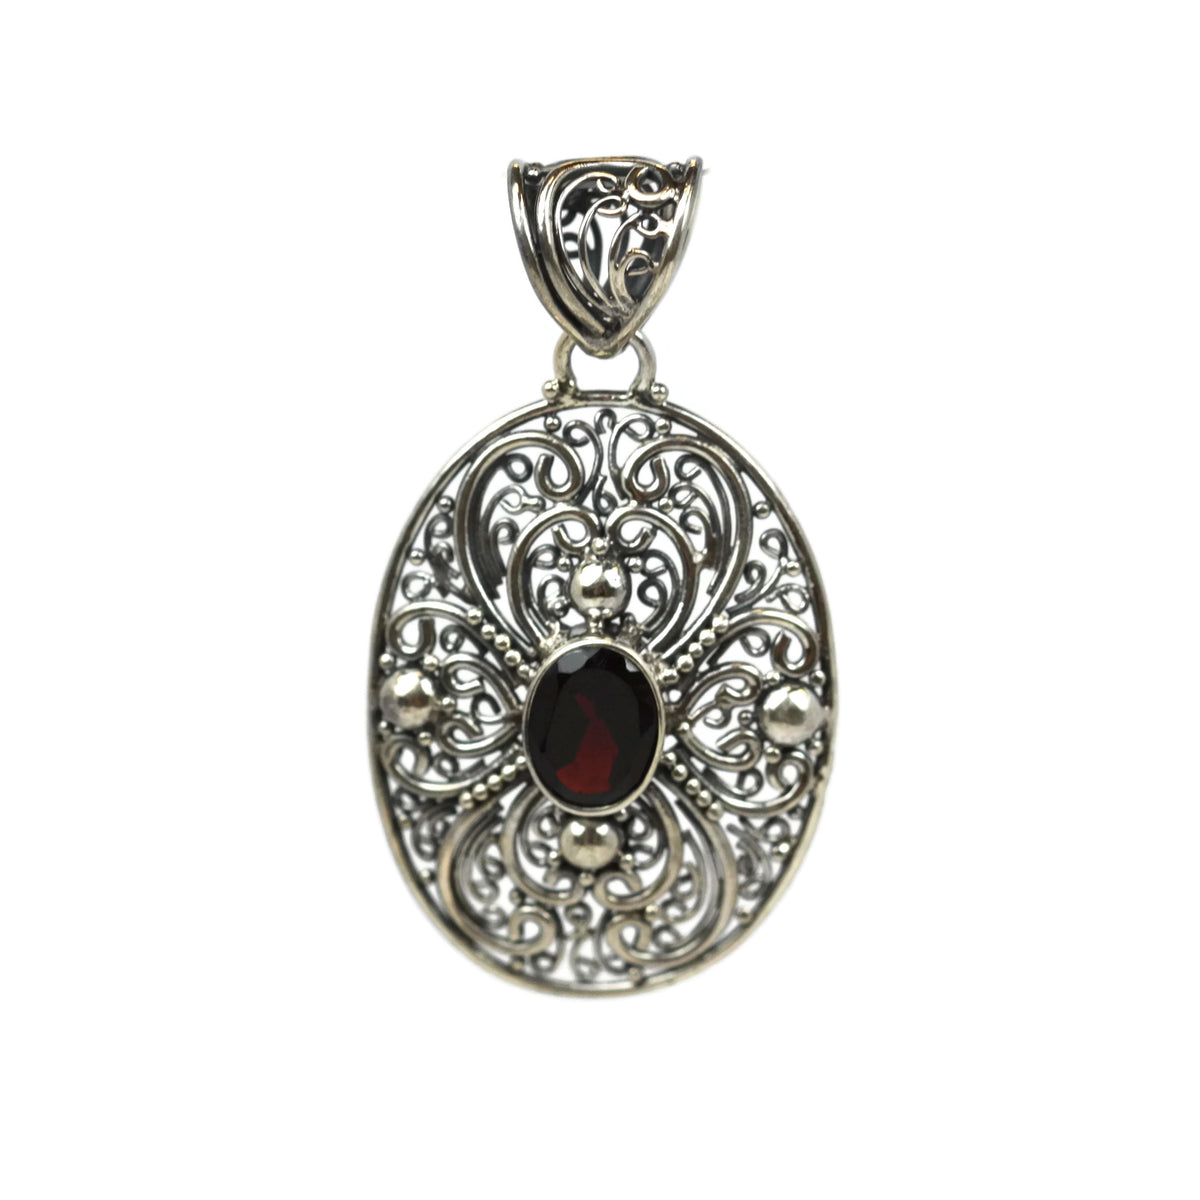 Handmade 925 Sterling Silver Antique Decorative Pendant With Oval Faceted Garnet Gemstone